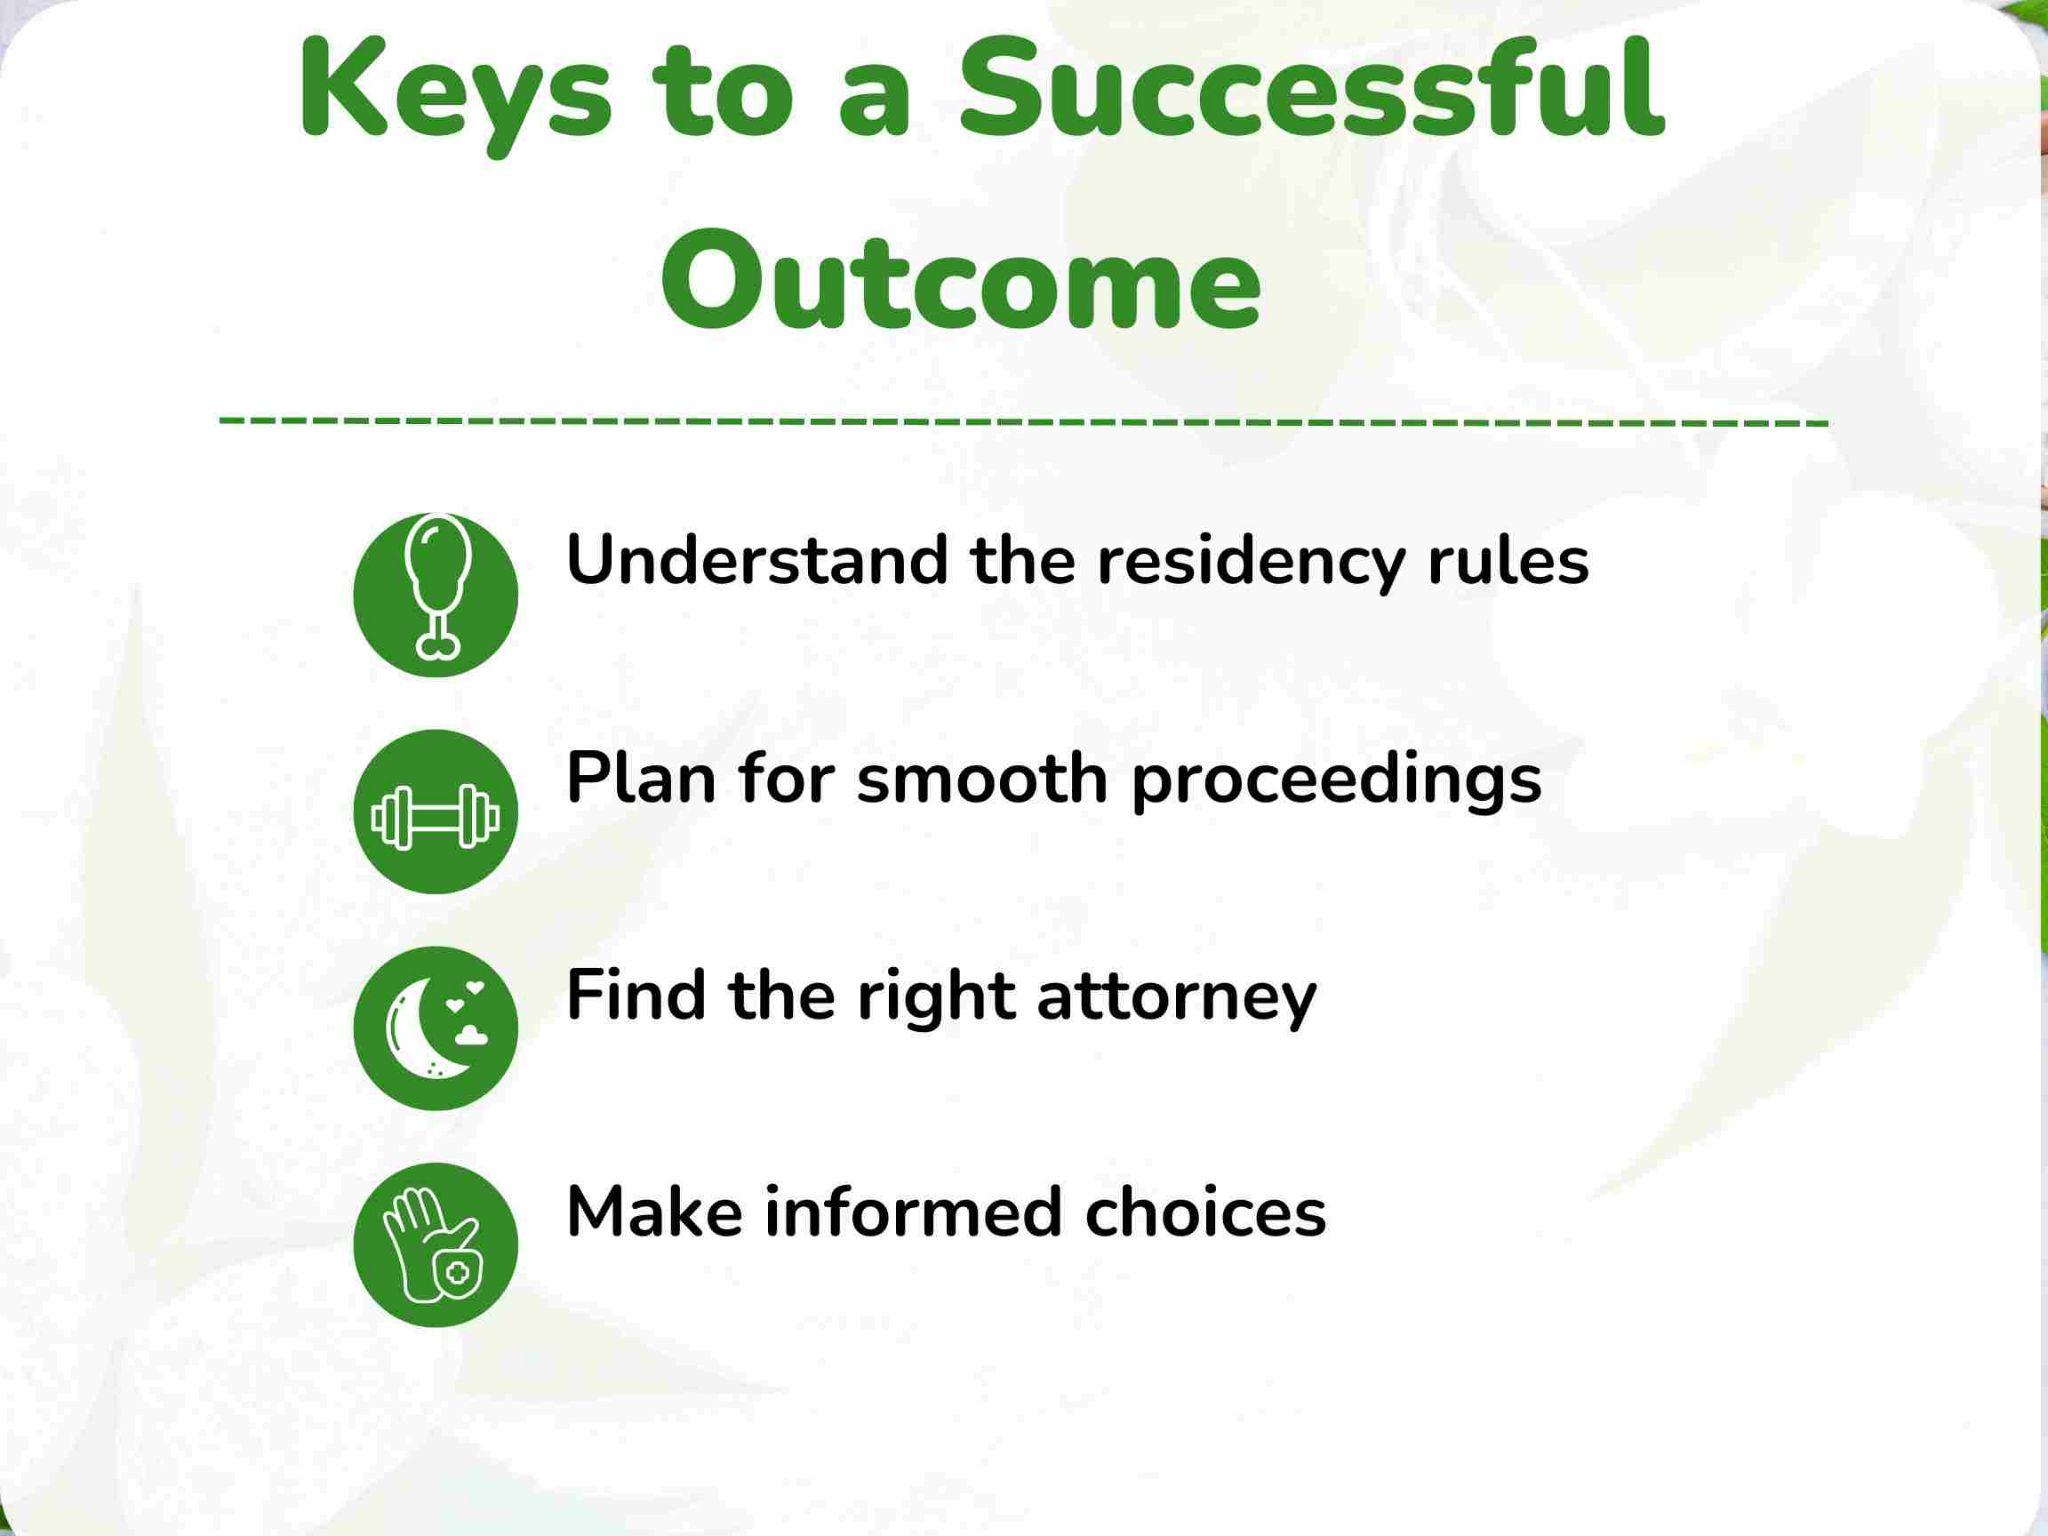 A slide with a green and white color scheme titled 'Keys to a Successful Outcome' lists four bullet points: 1) Understand the residency rules - can you file for divorce in another state? 